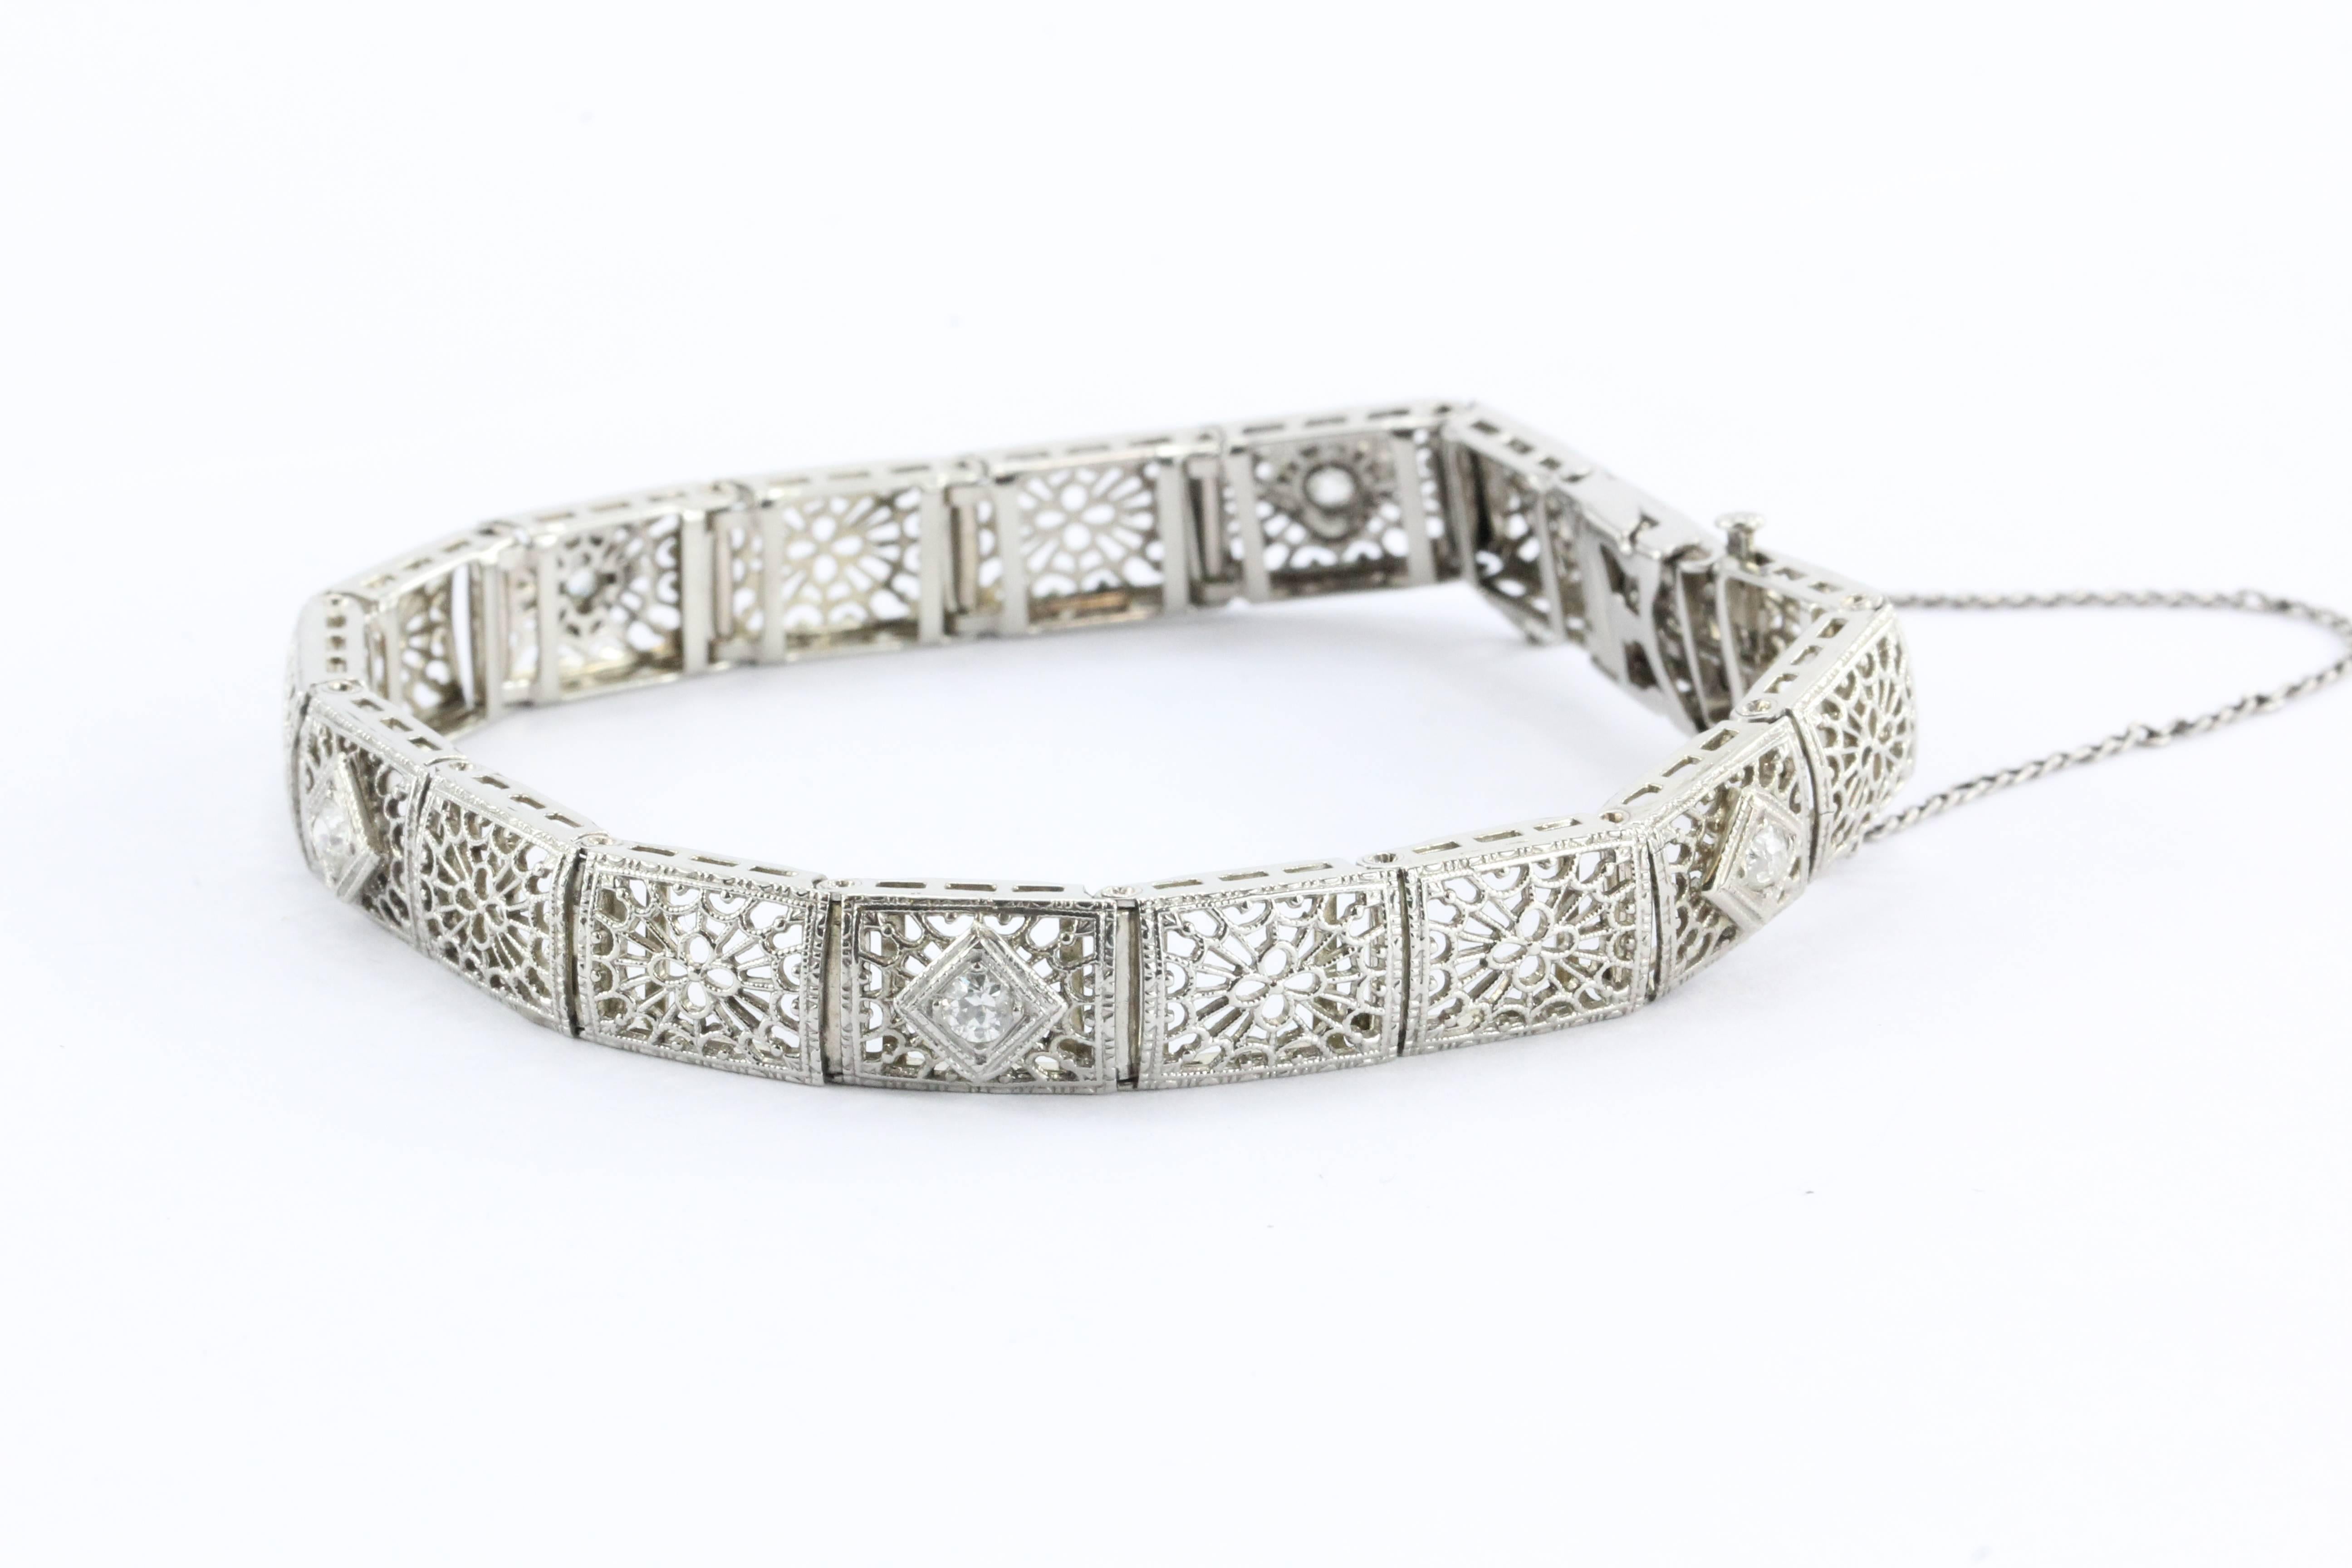  Antique Art Deco 14K White Gold & Old Mine Diamond Bracelet .50 TCW. The piece is in excellent estate condition, the filigree is flawless with no bends or breaks. The clasp and safety chain still work perfectly. The piece is hallmarked 14K on the